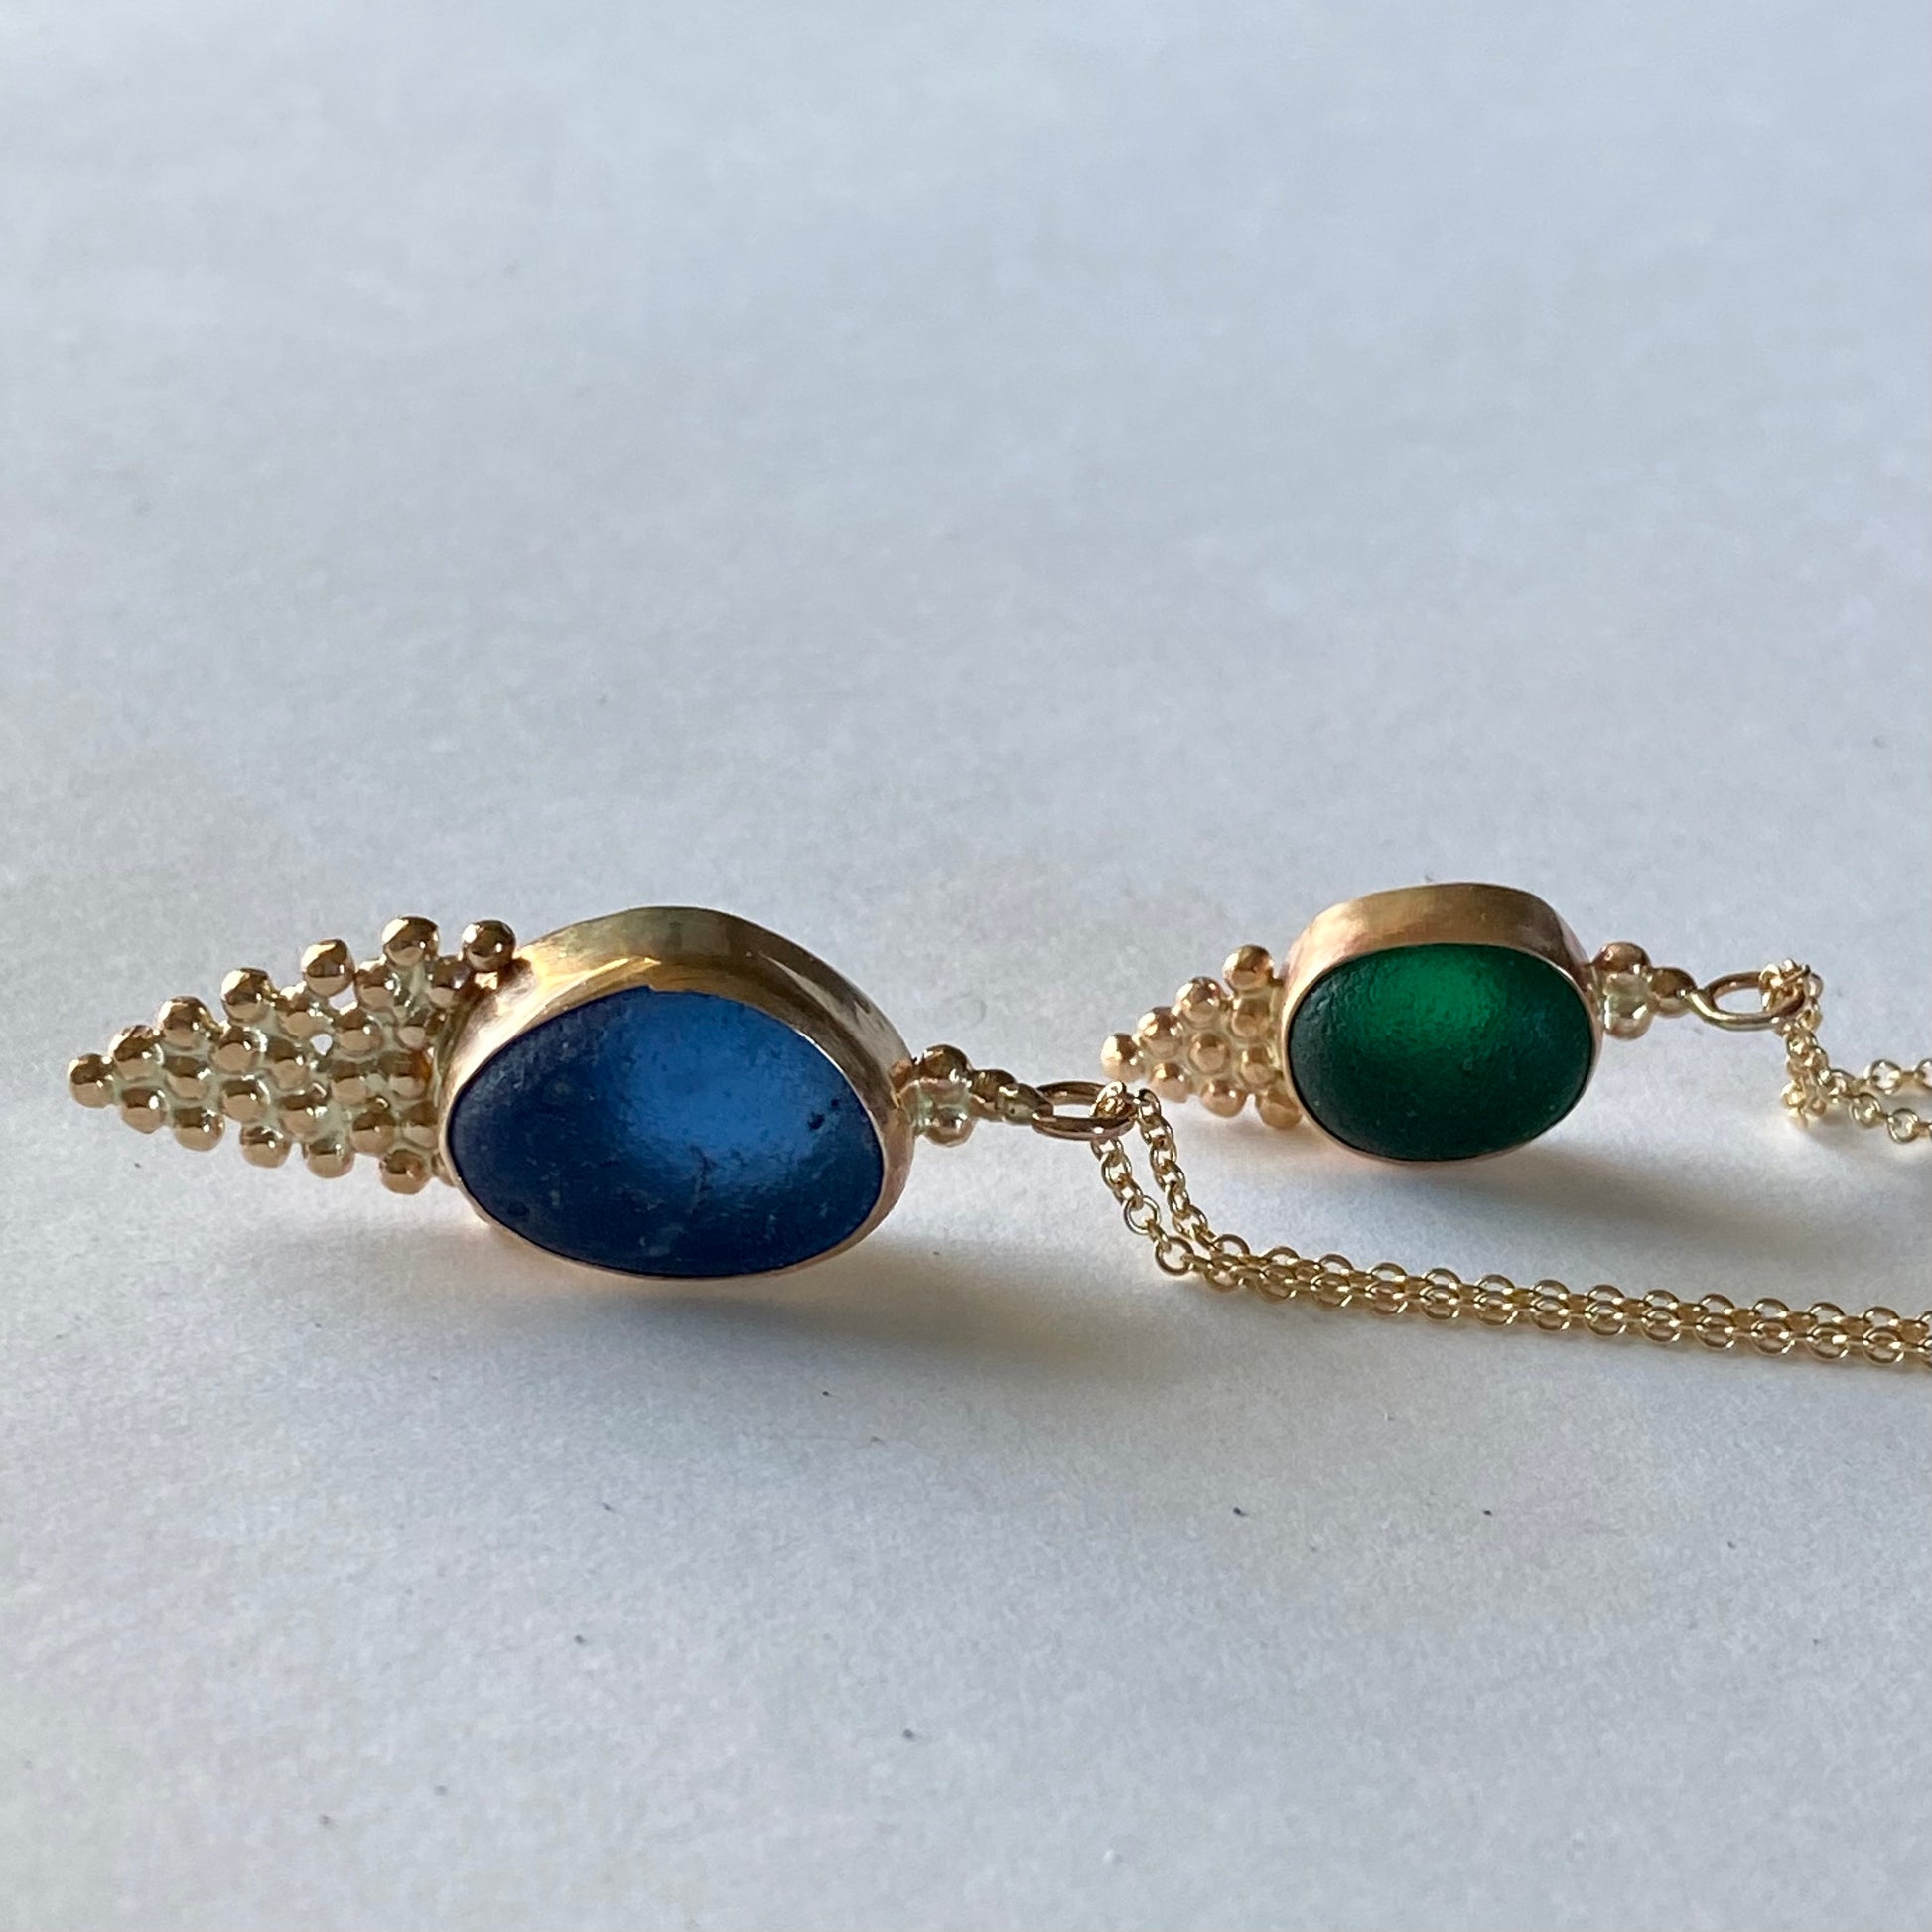 The Mermaid Tail Pendant - The Mermaid Tail Necklace. Beautiful piece of sea glass nested in a hand-crafted in a 14k gold bezel with 14k gold fill accents. Kate Samson Design